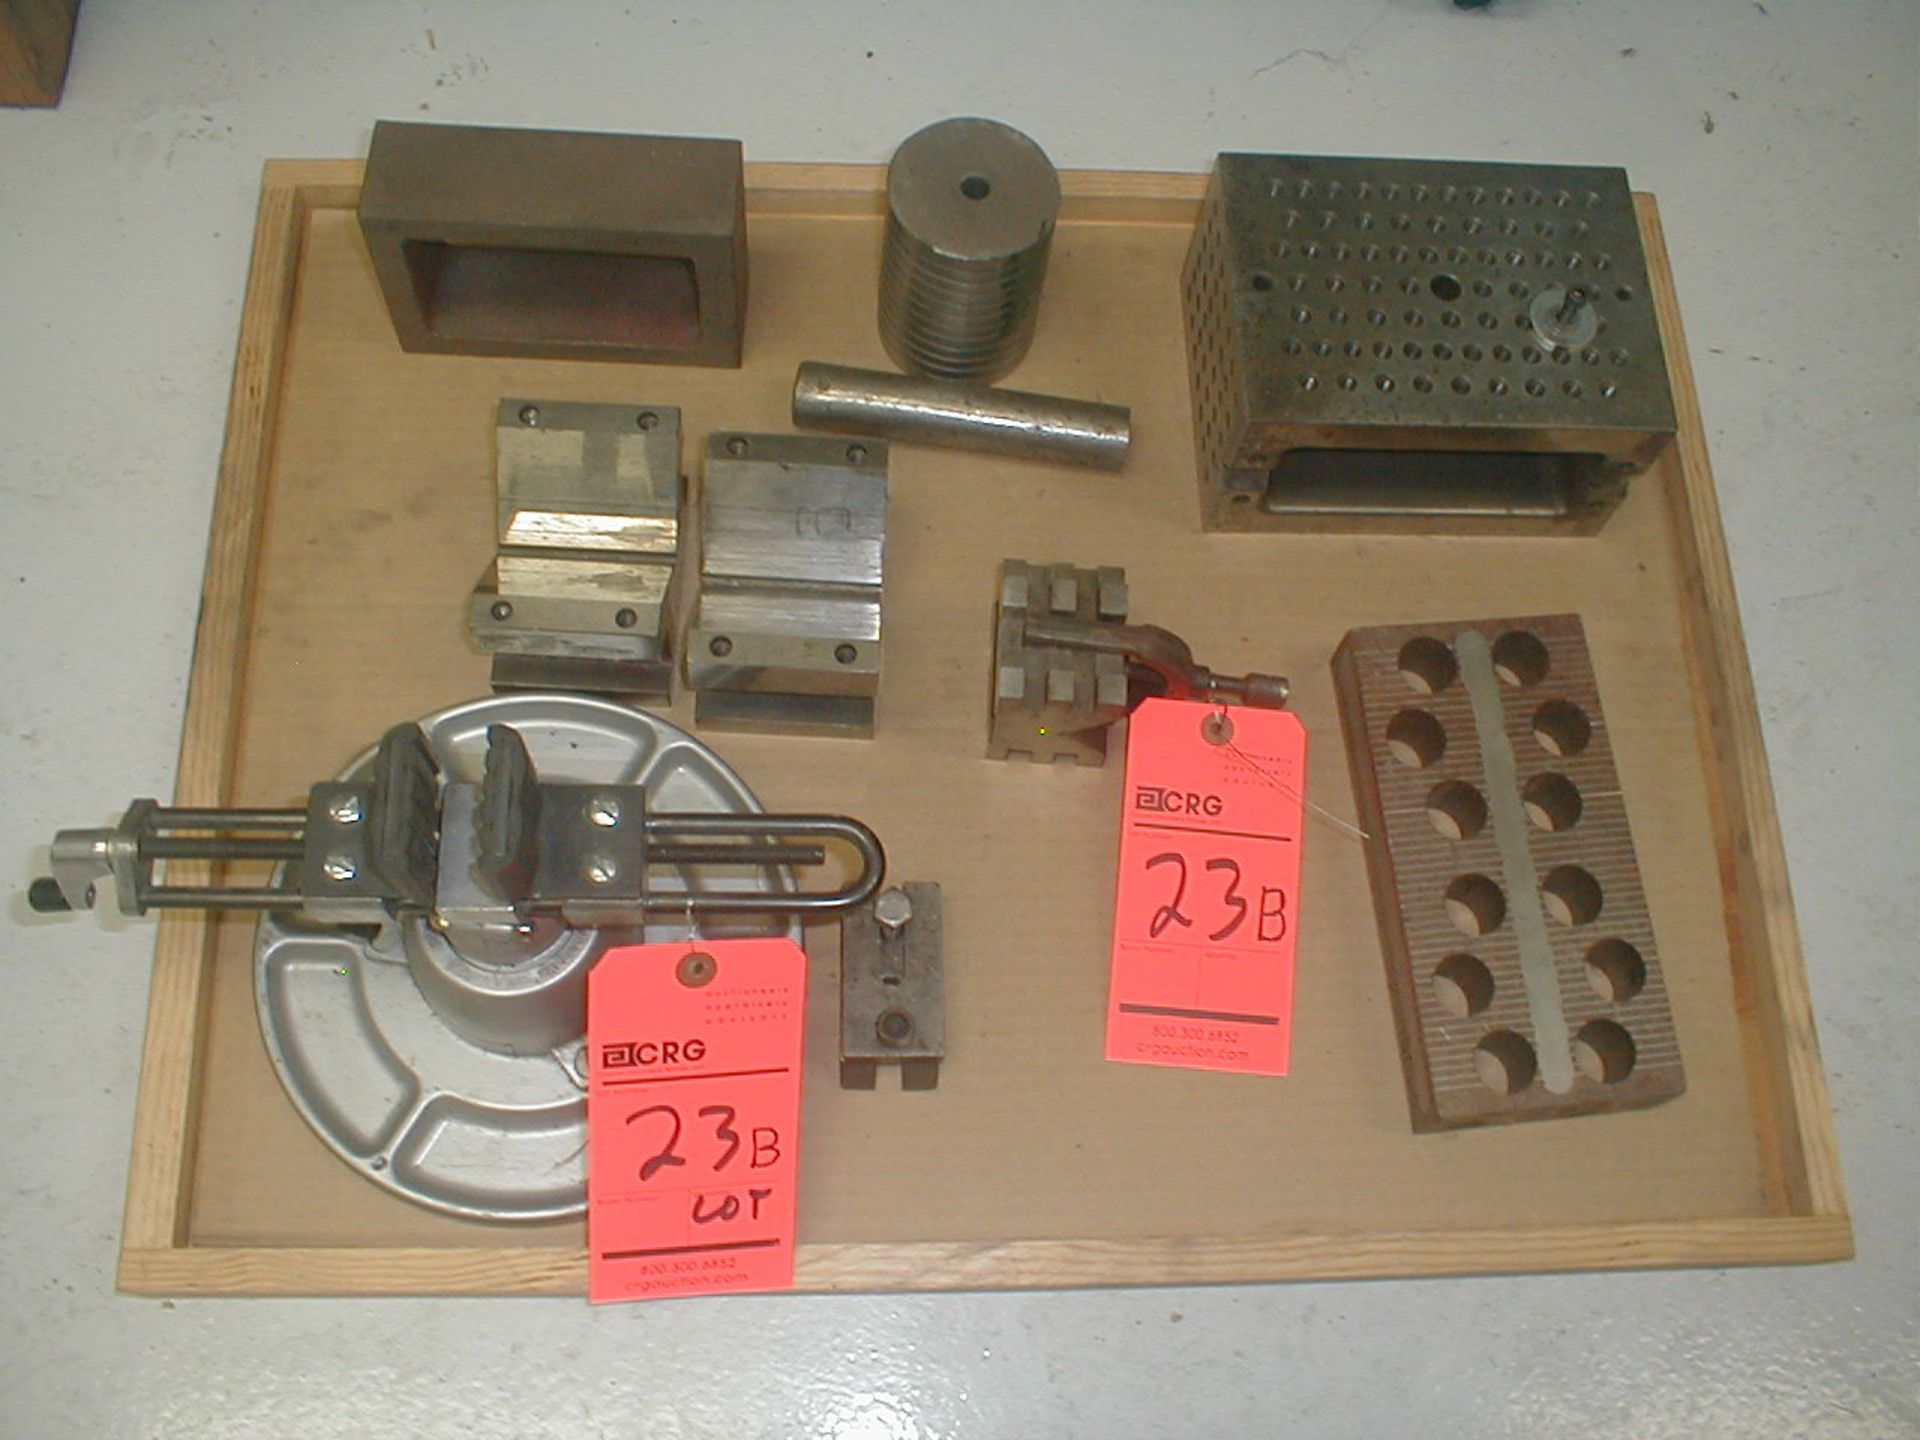 Lot of assorted machining accessories including v-blocks, risers, etc.